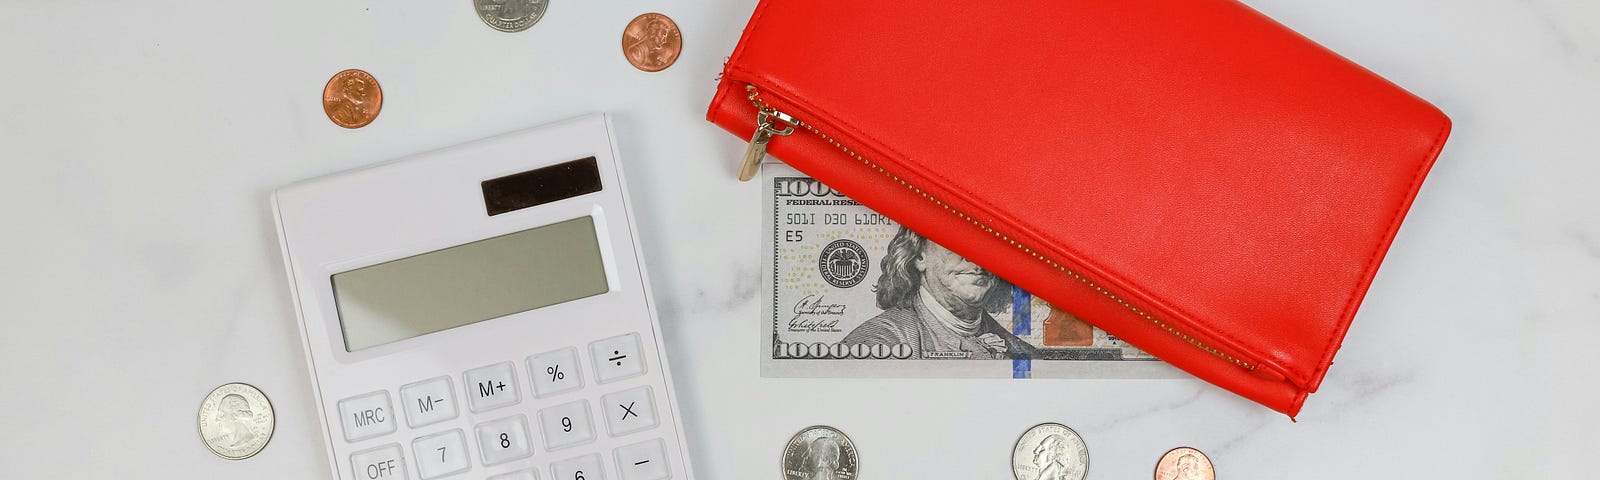 A calculator and some coins with a note partially hidden under a bright orange purse.